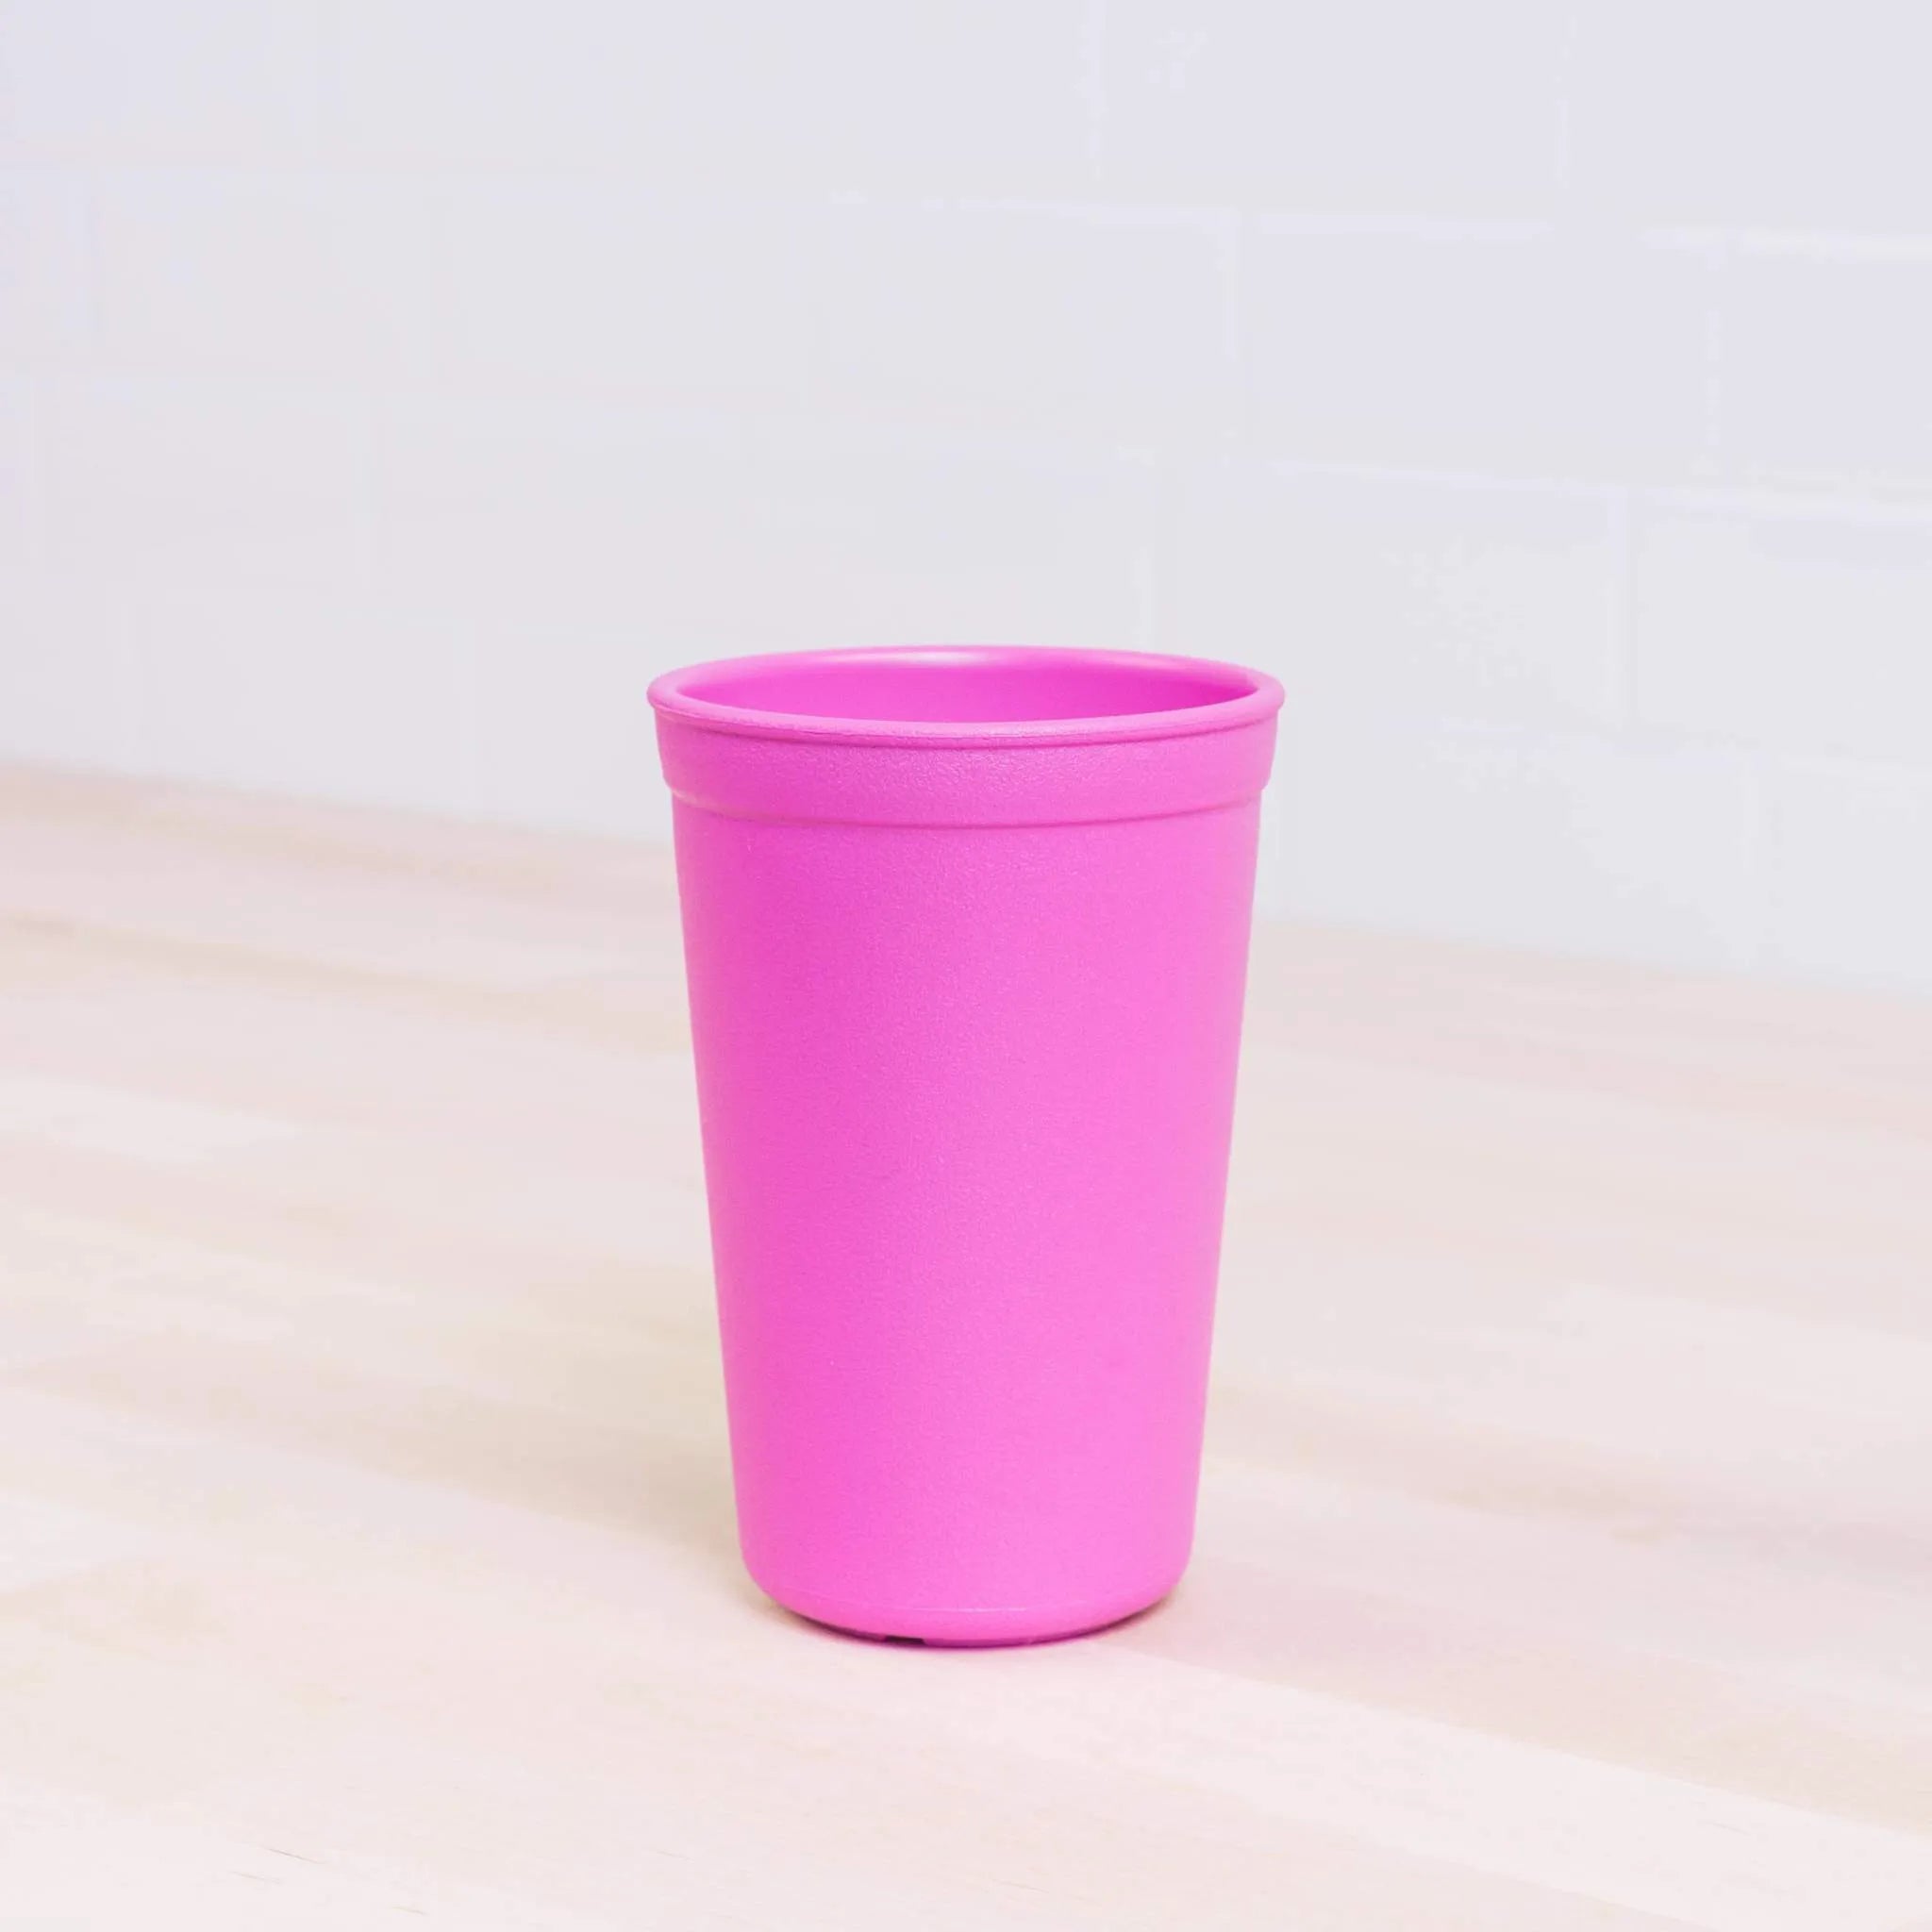 Re-Play - Packaged Drinking Cups - Easter - Pack of 3